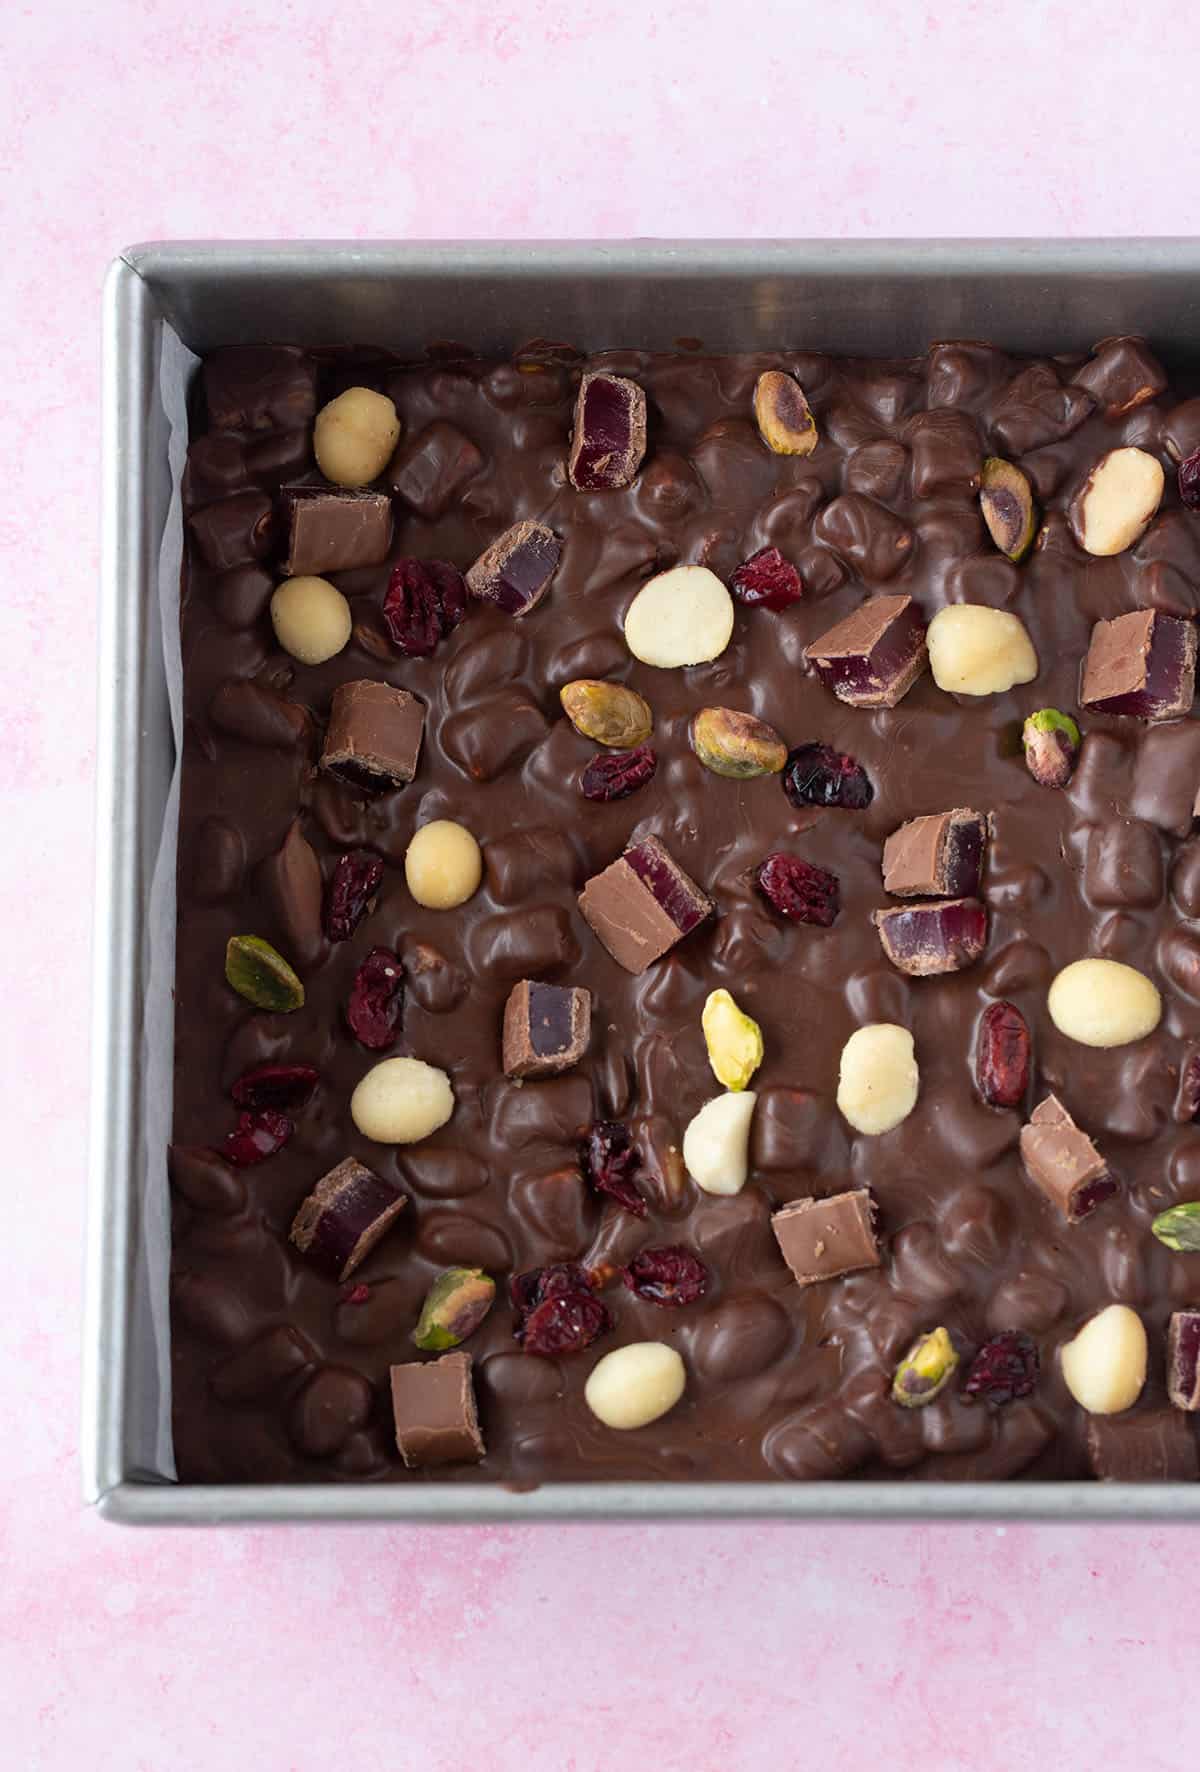 Top view of a slab of Christmas Rocky Road in a baking pan.